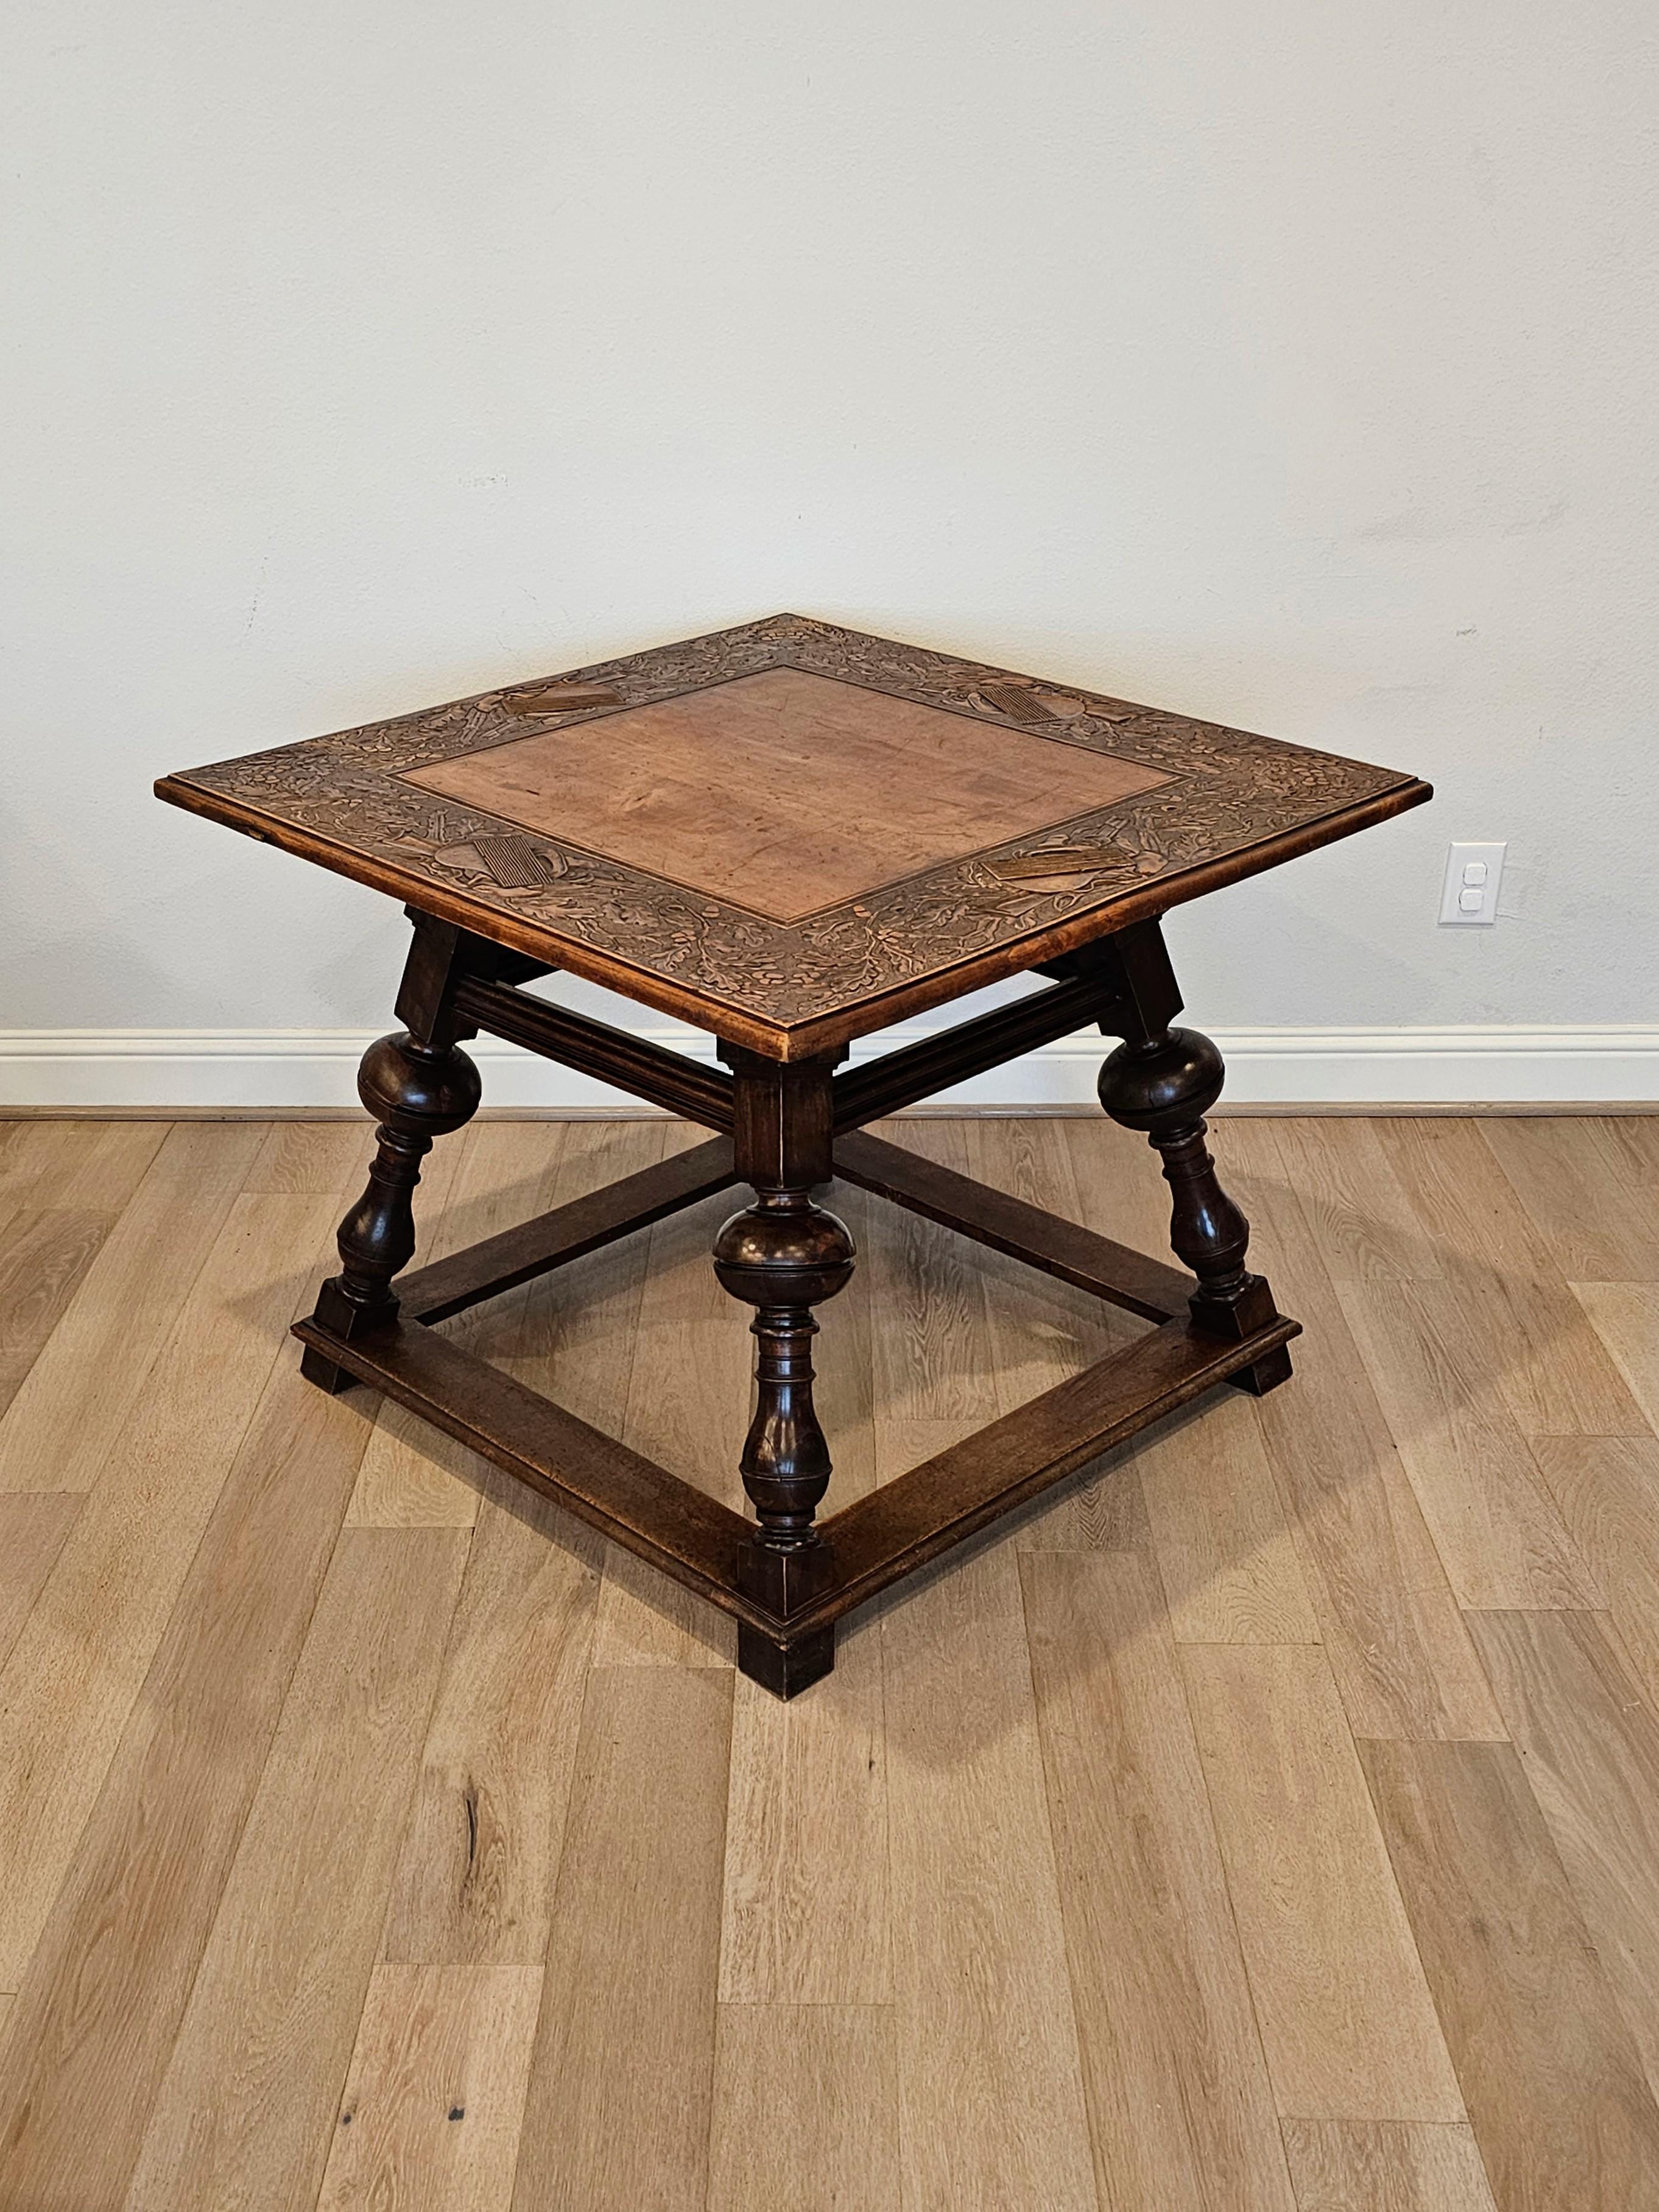 A scarce late 19th century Swiss Black Forest hand carved walnut table with nicely aged warm patina. 

Hand-crafted in Switzerland, circa 1880, the square tabletop features a relief carved border of oak branches, foliage and musical instruments,